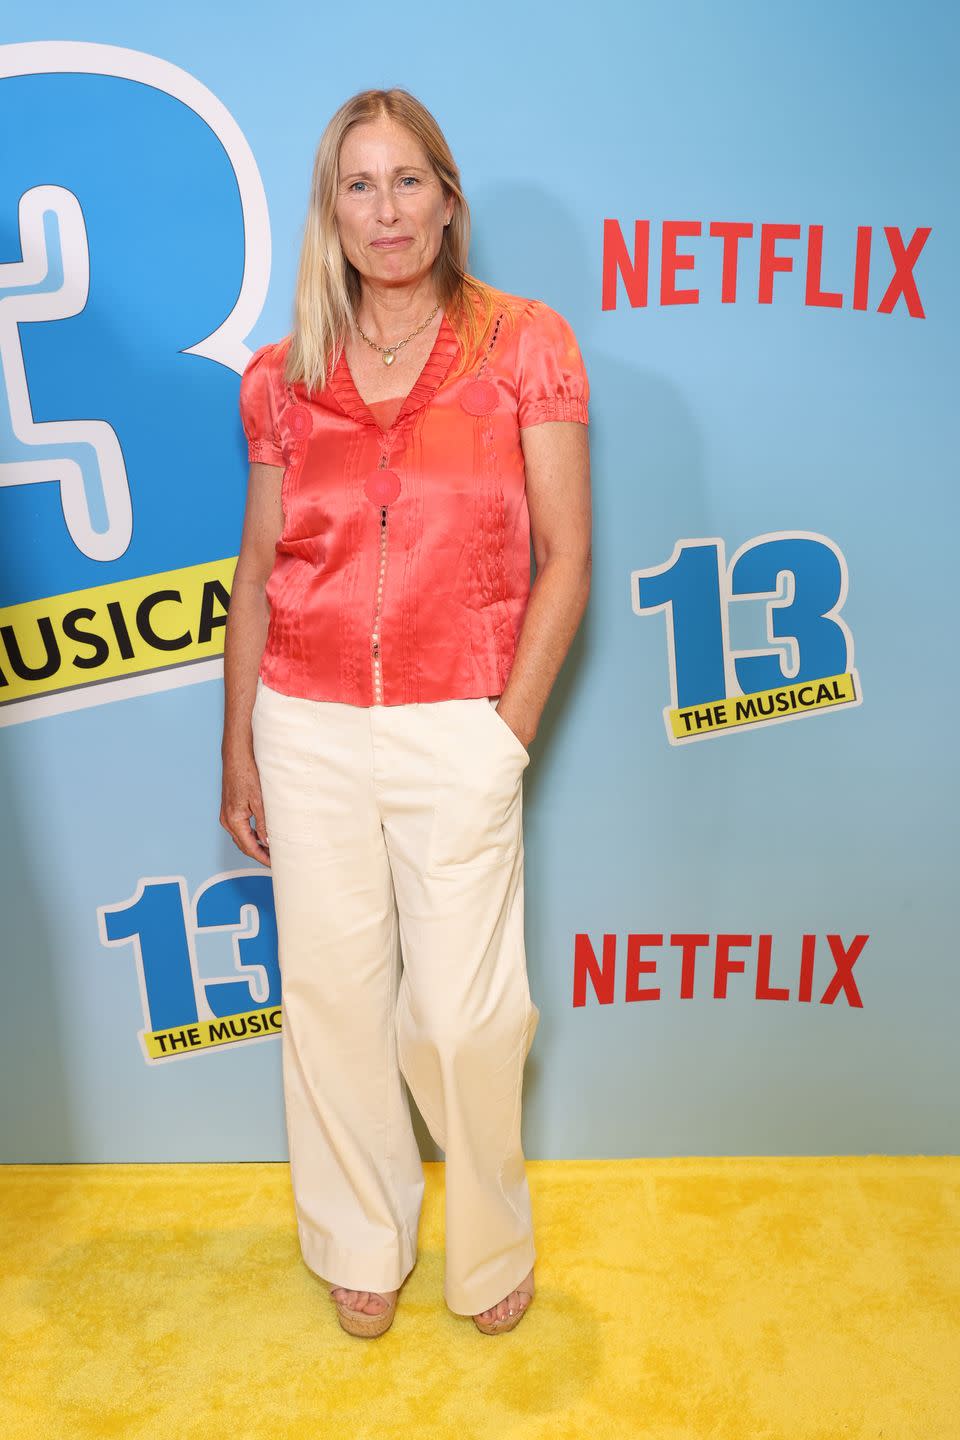 tamra davis wears a coral, short sleeved blouse and cream trousers with peep toe platform heels, she has one hand in her pocket